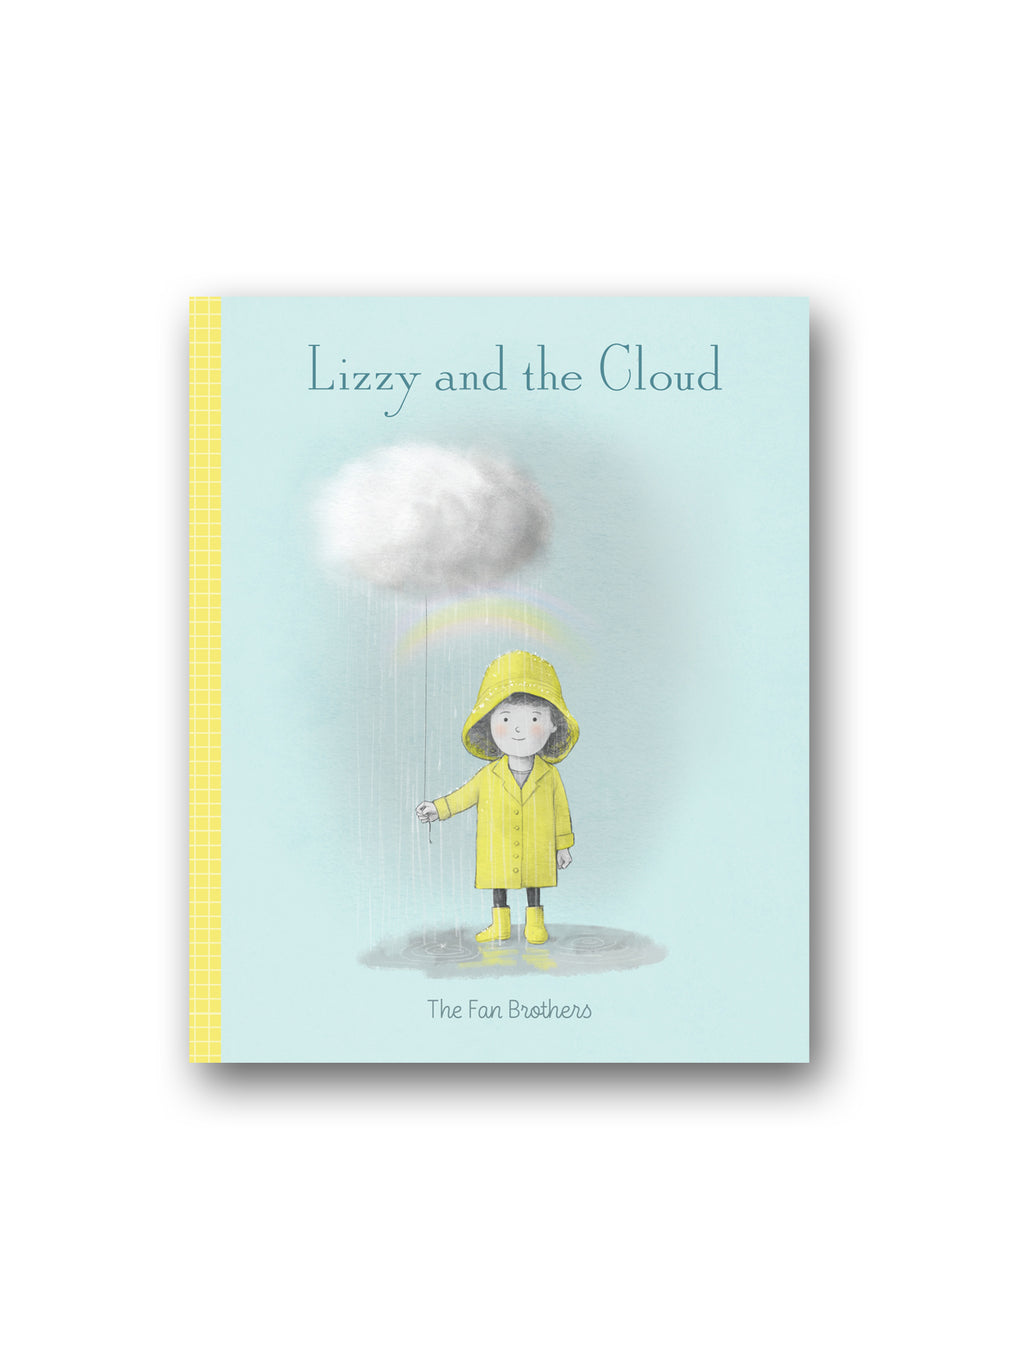 Lizzy and the Cloud